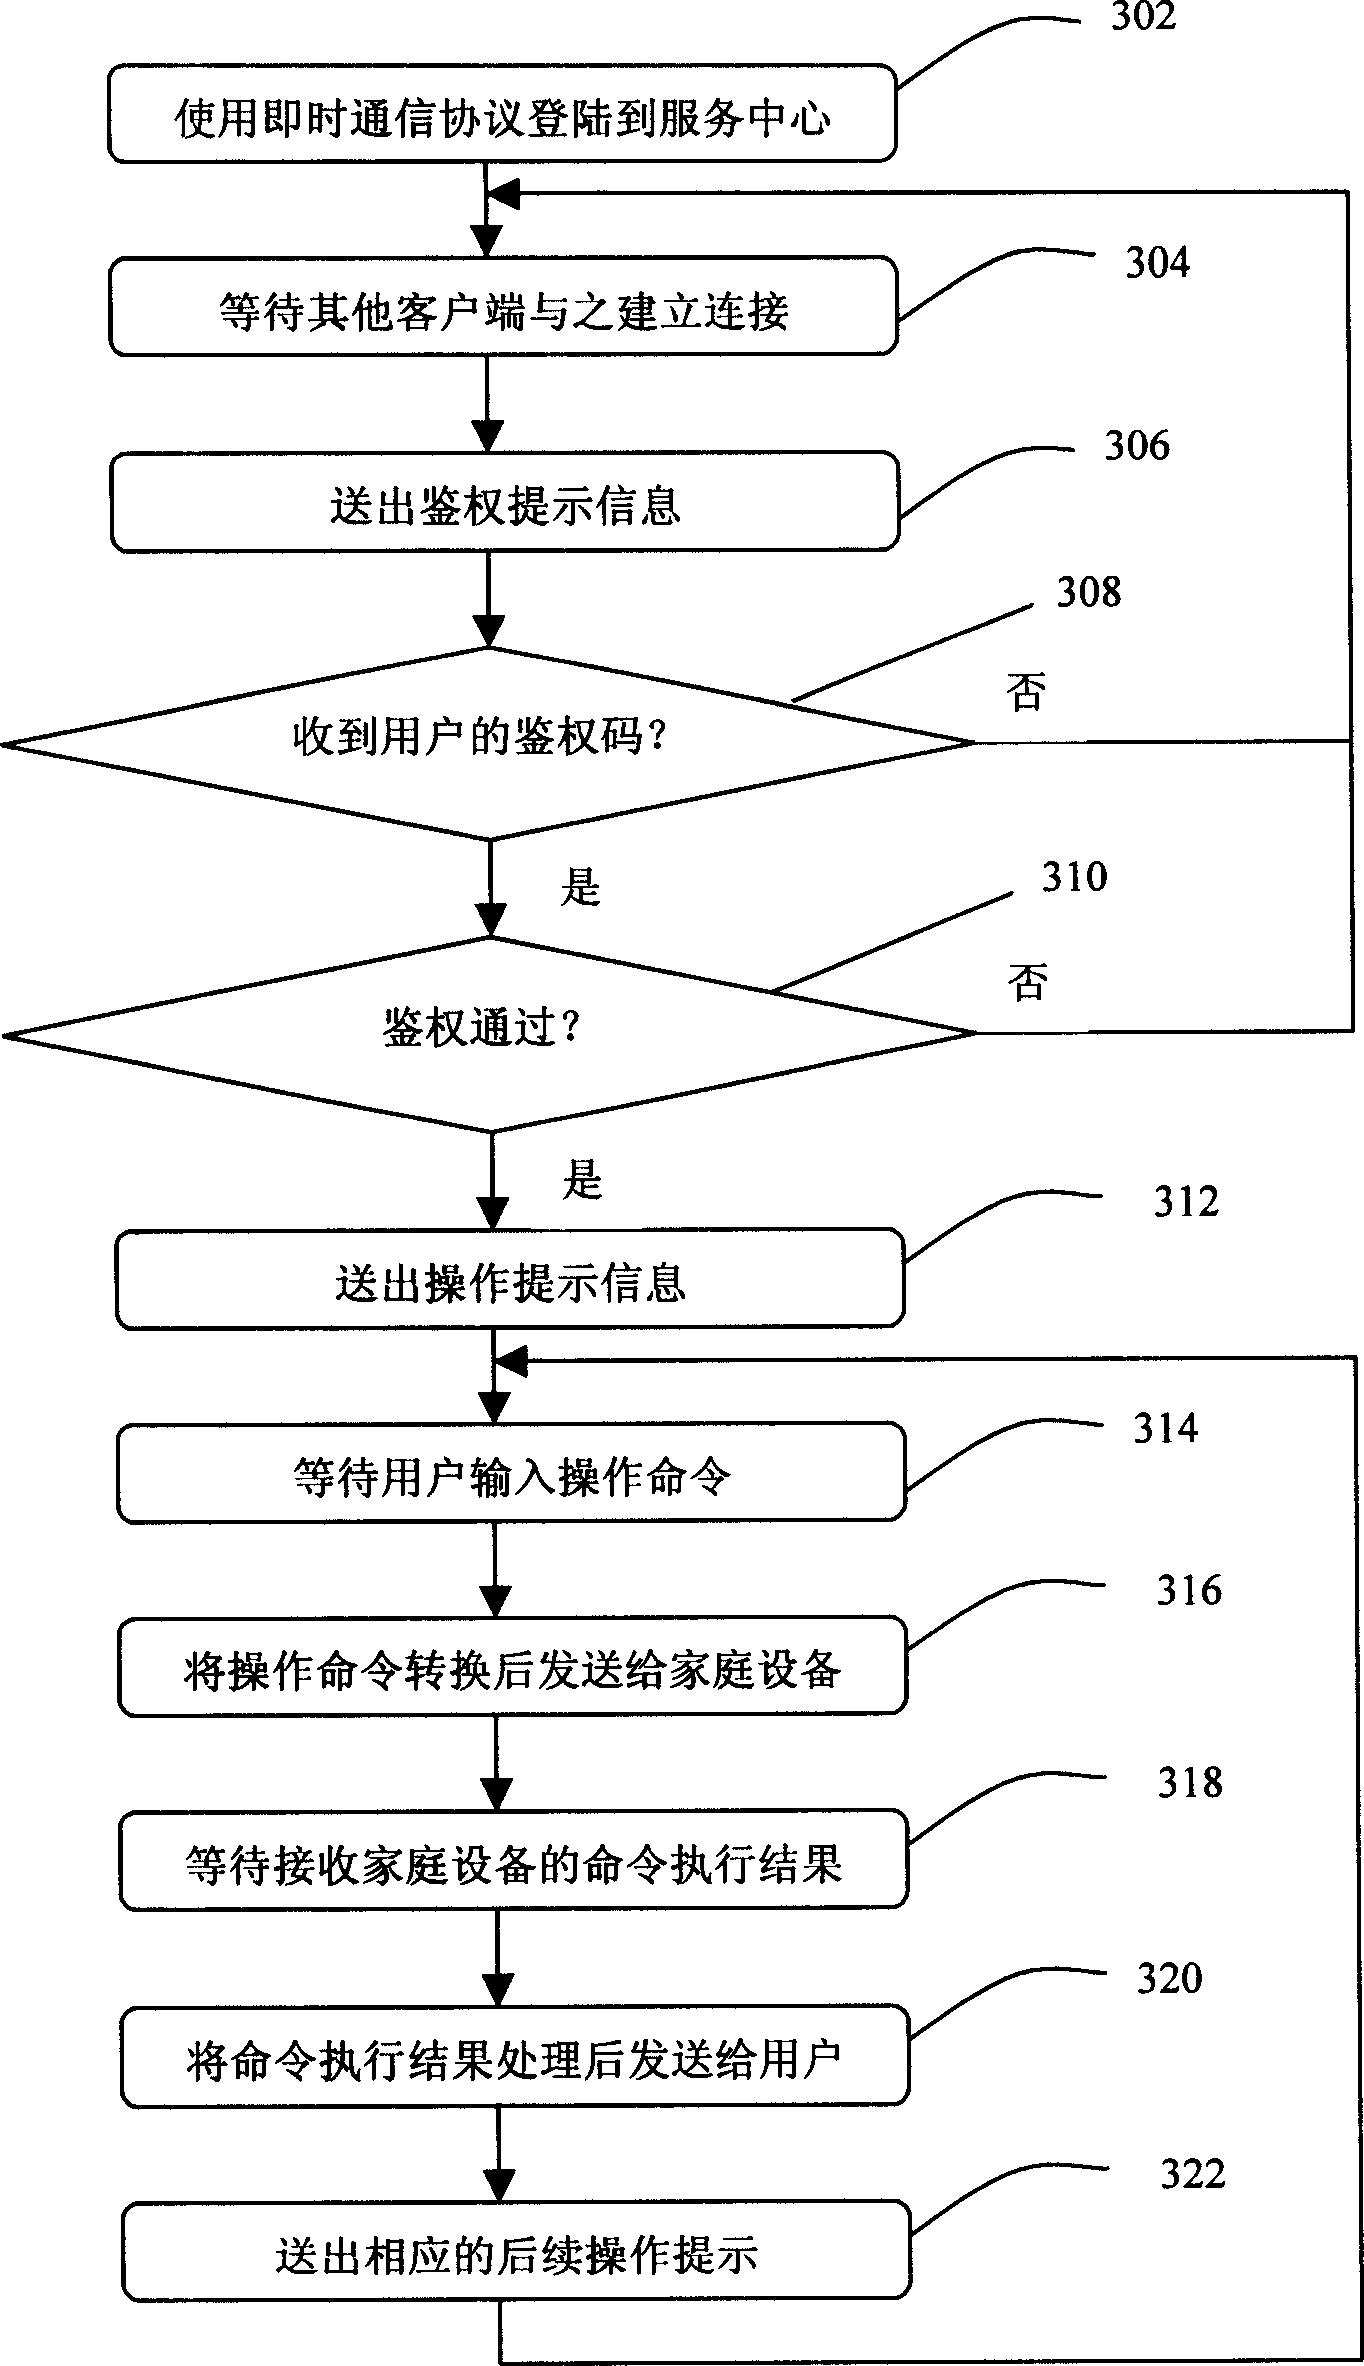 Method for remote control of domestic network apparatus